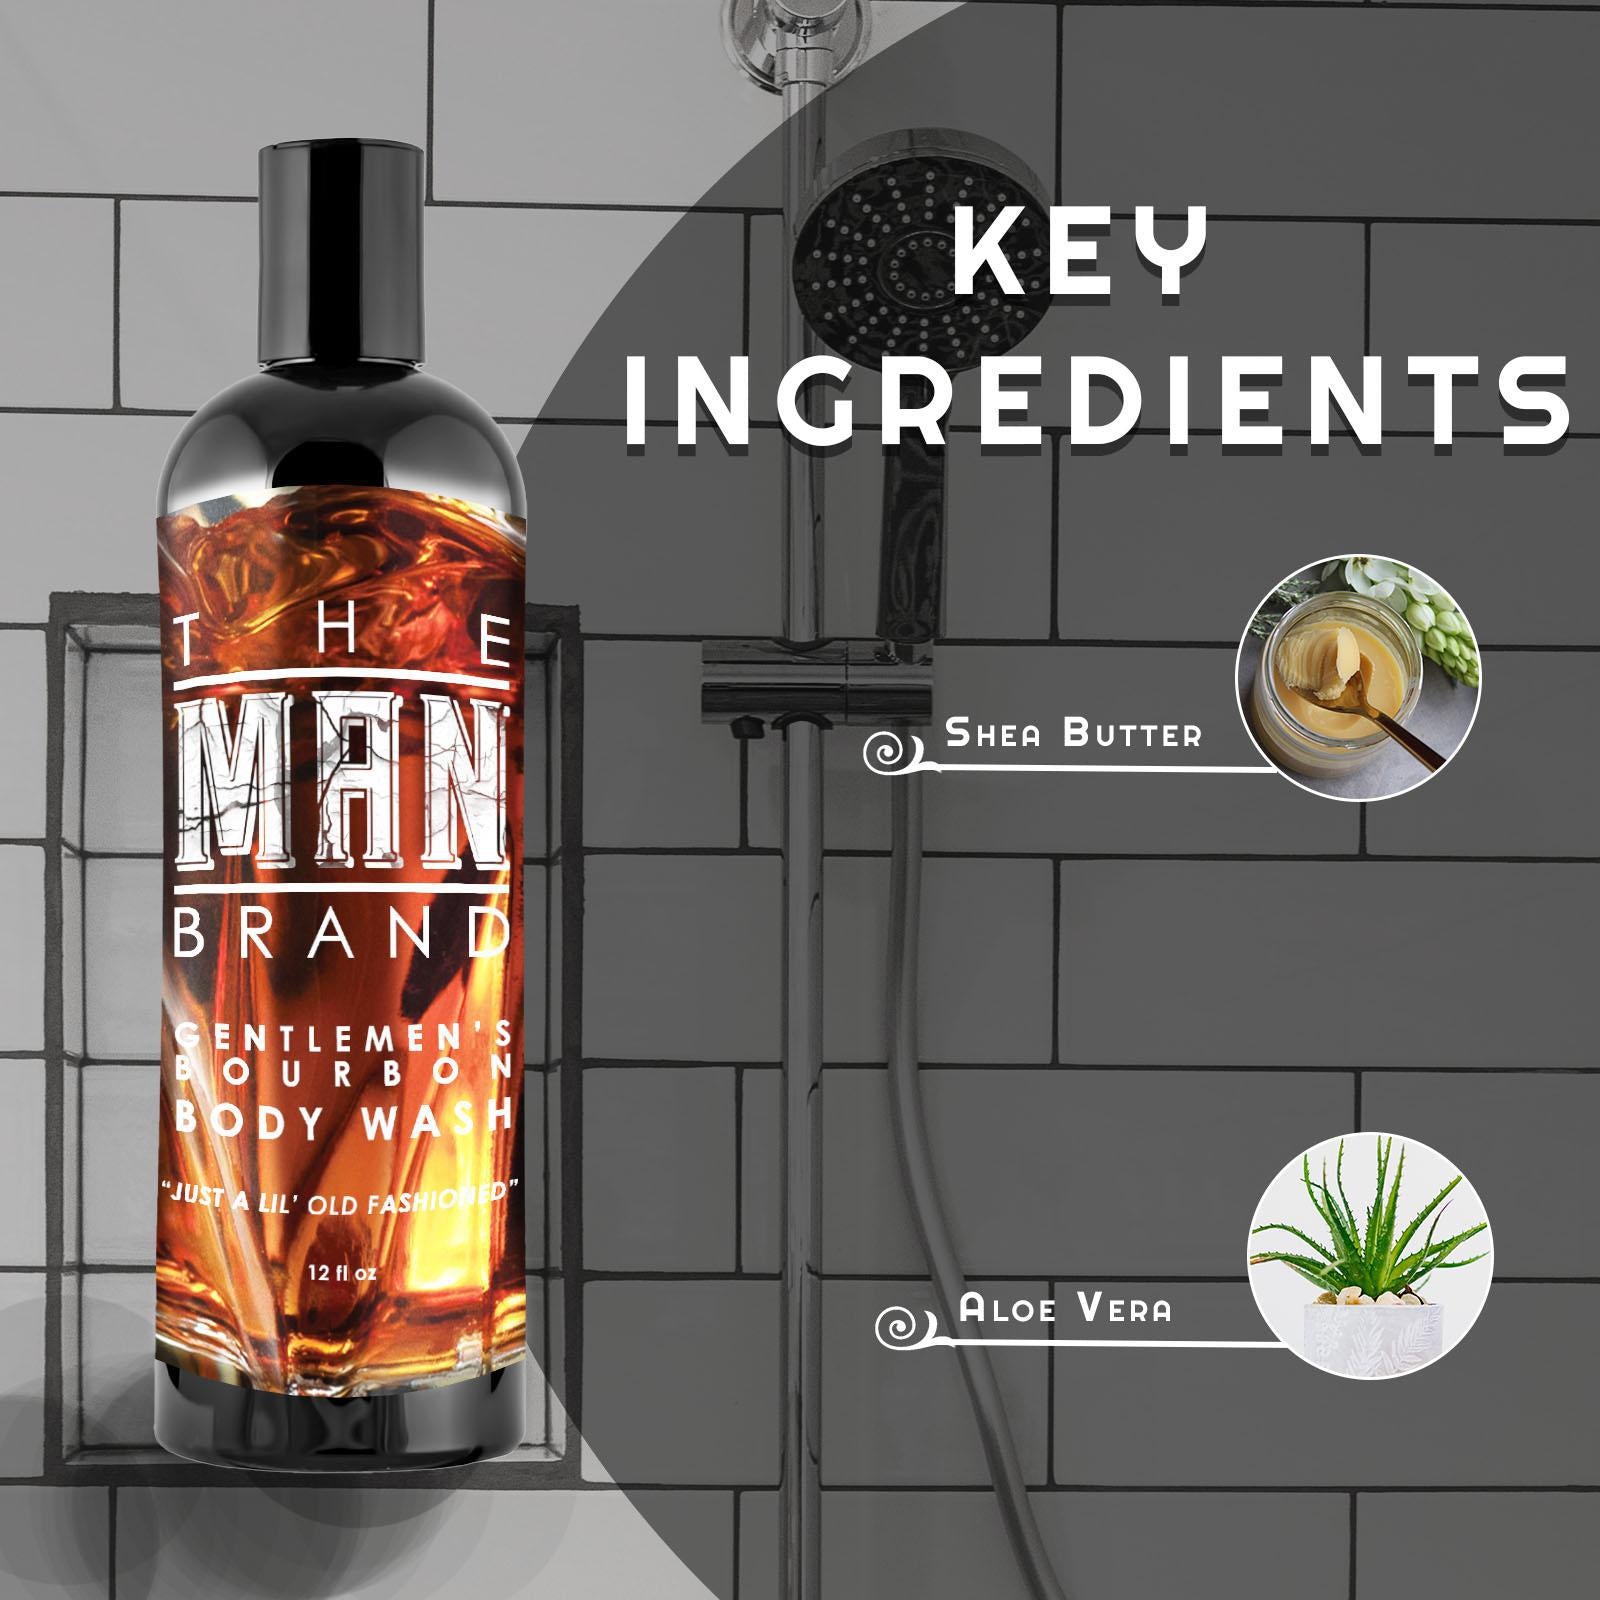 Men's Skin Grooming Kit: Body Lotion, Body Wash, and Solid Cologne